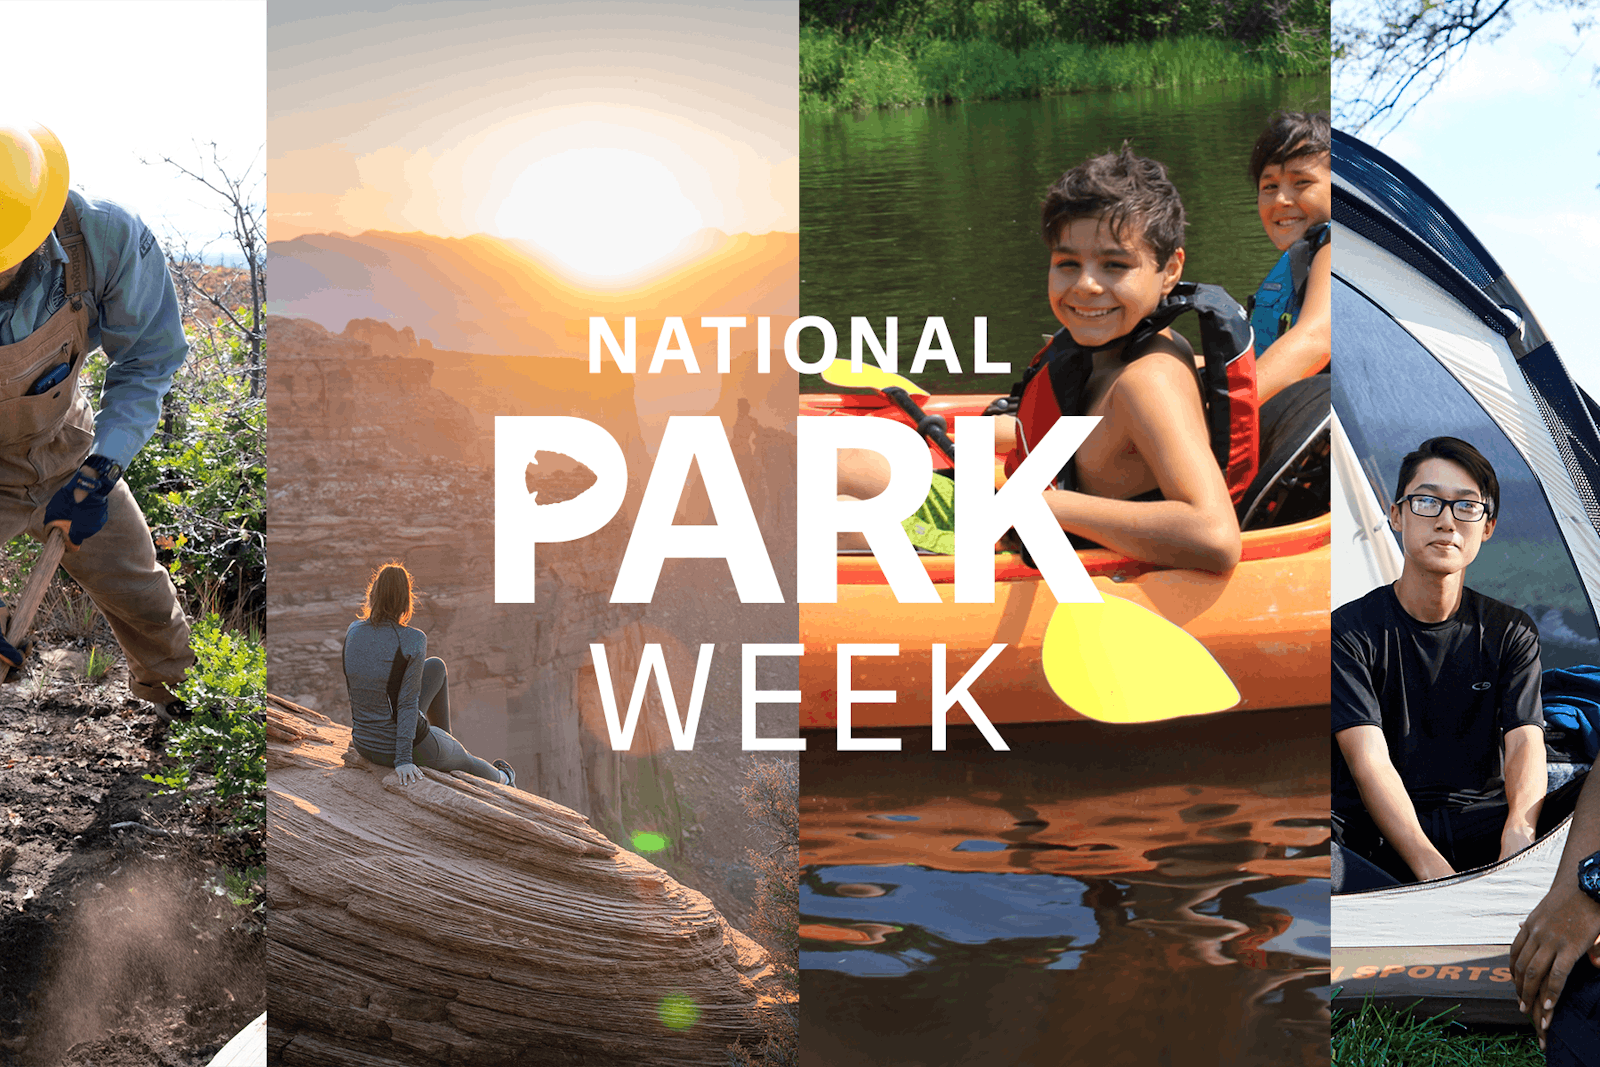 Four images in a collage. On top of the images, text reads "National Park Week"